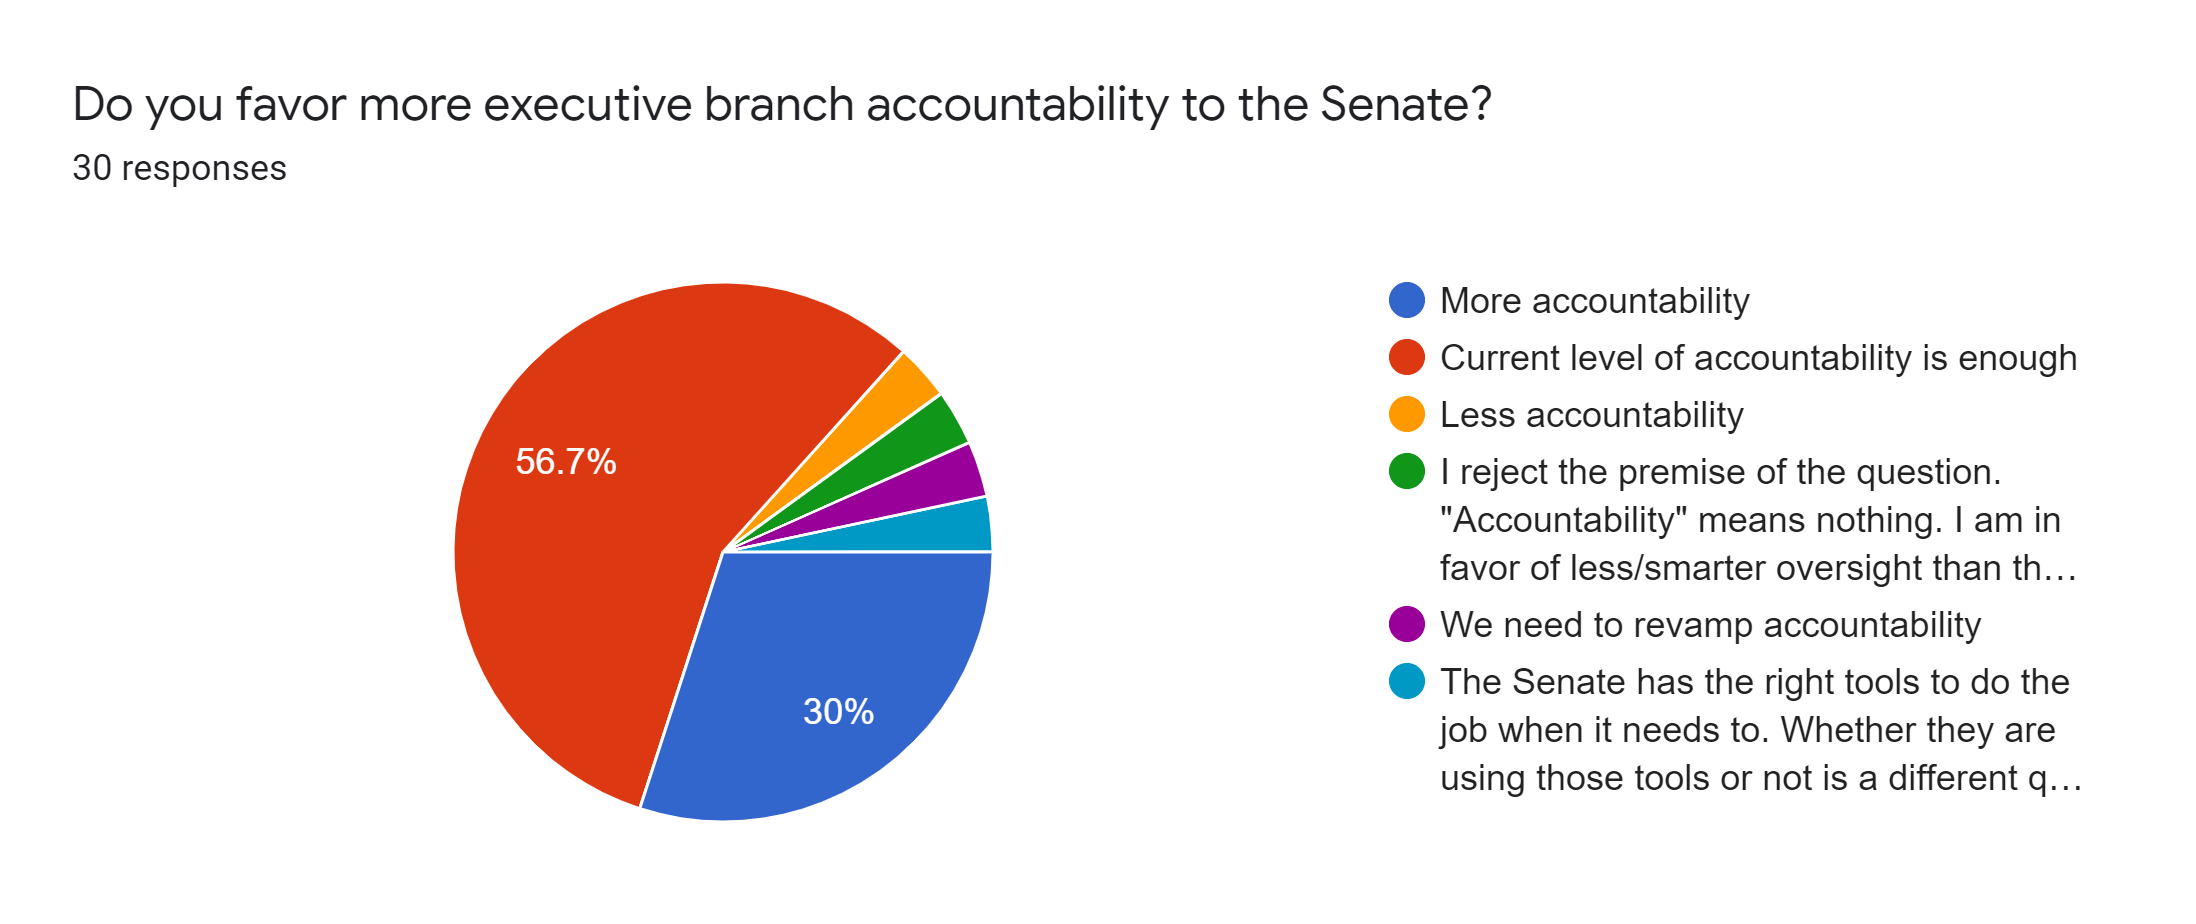 Forms response chart. Question title: Do you favor more executive branch accountability to the Senate?. Number of responses: 30 responses.